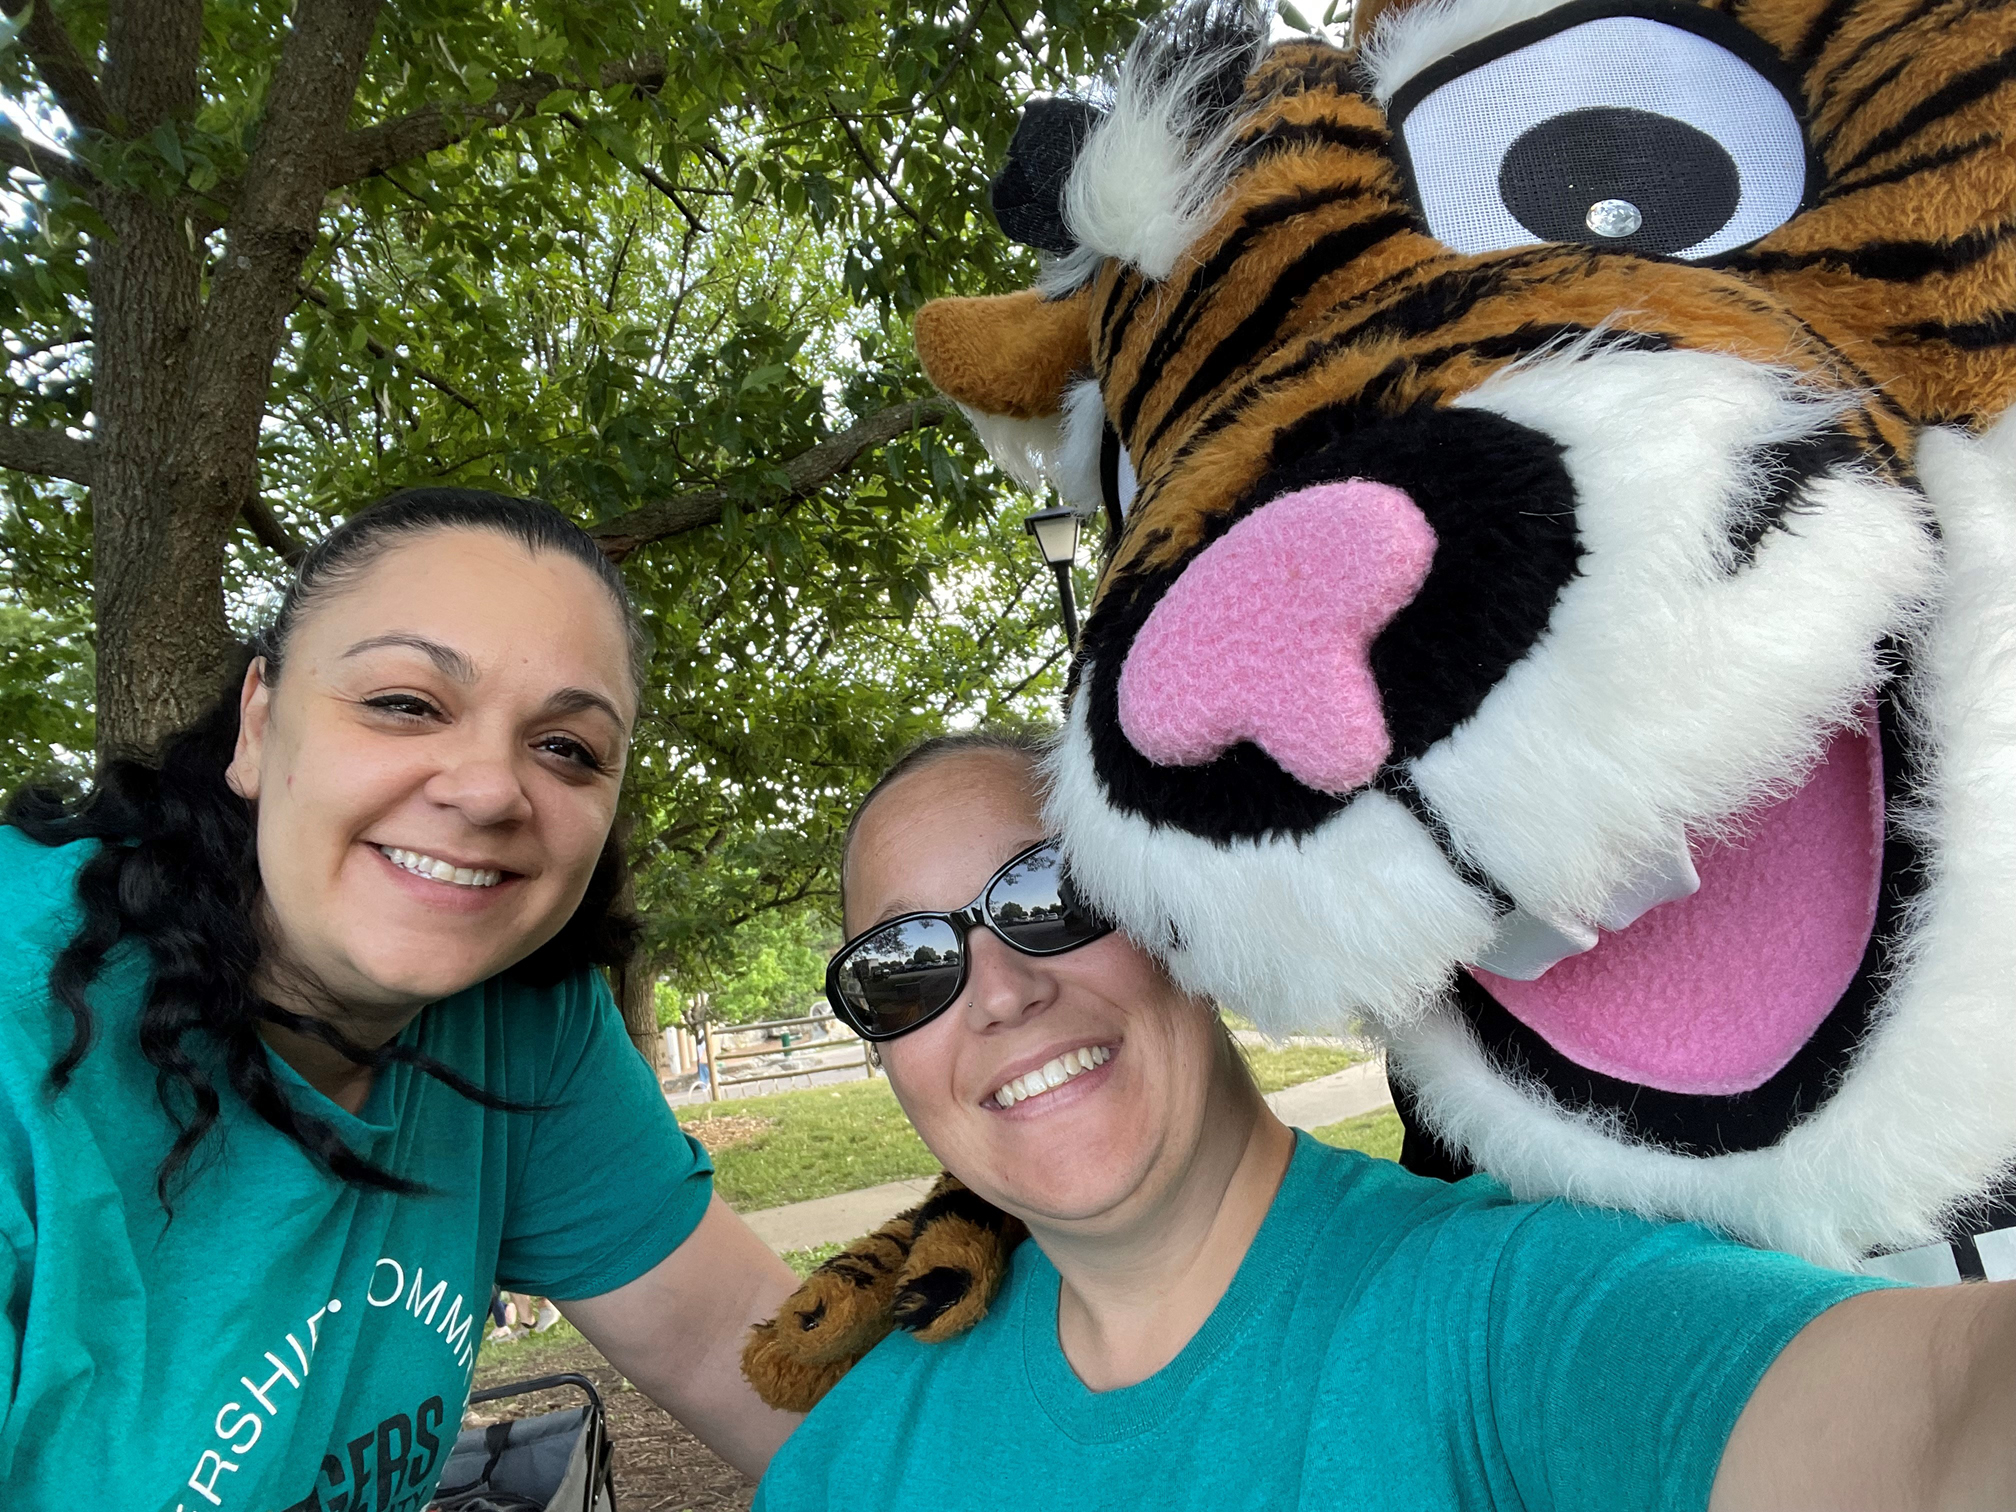 Tigers Community Credit Union staff volunteering at Columbia's Family Fun Fest in Cosmo Park.